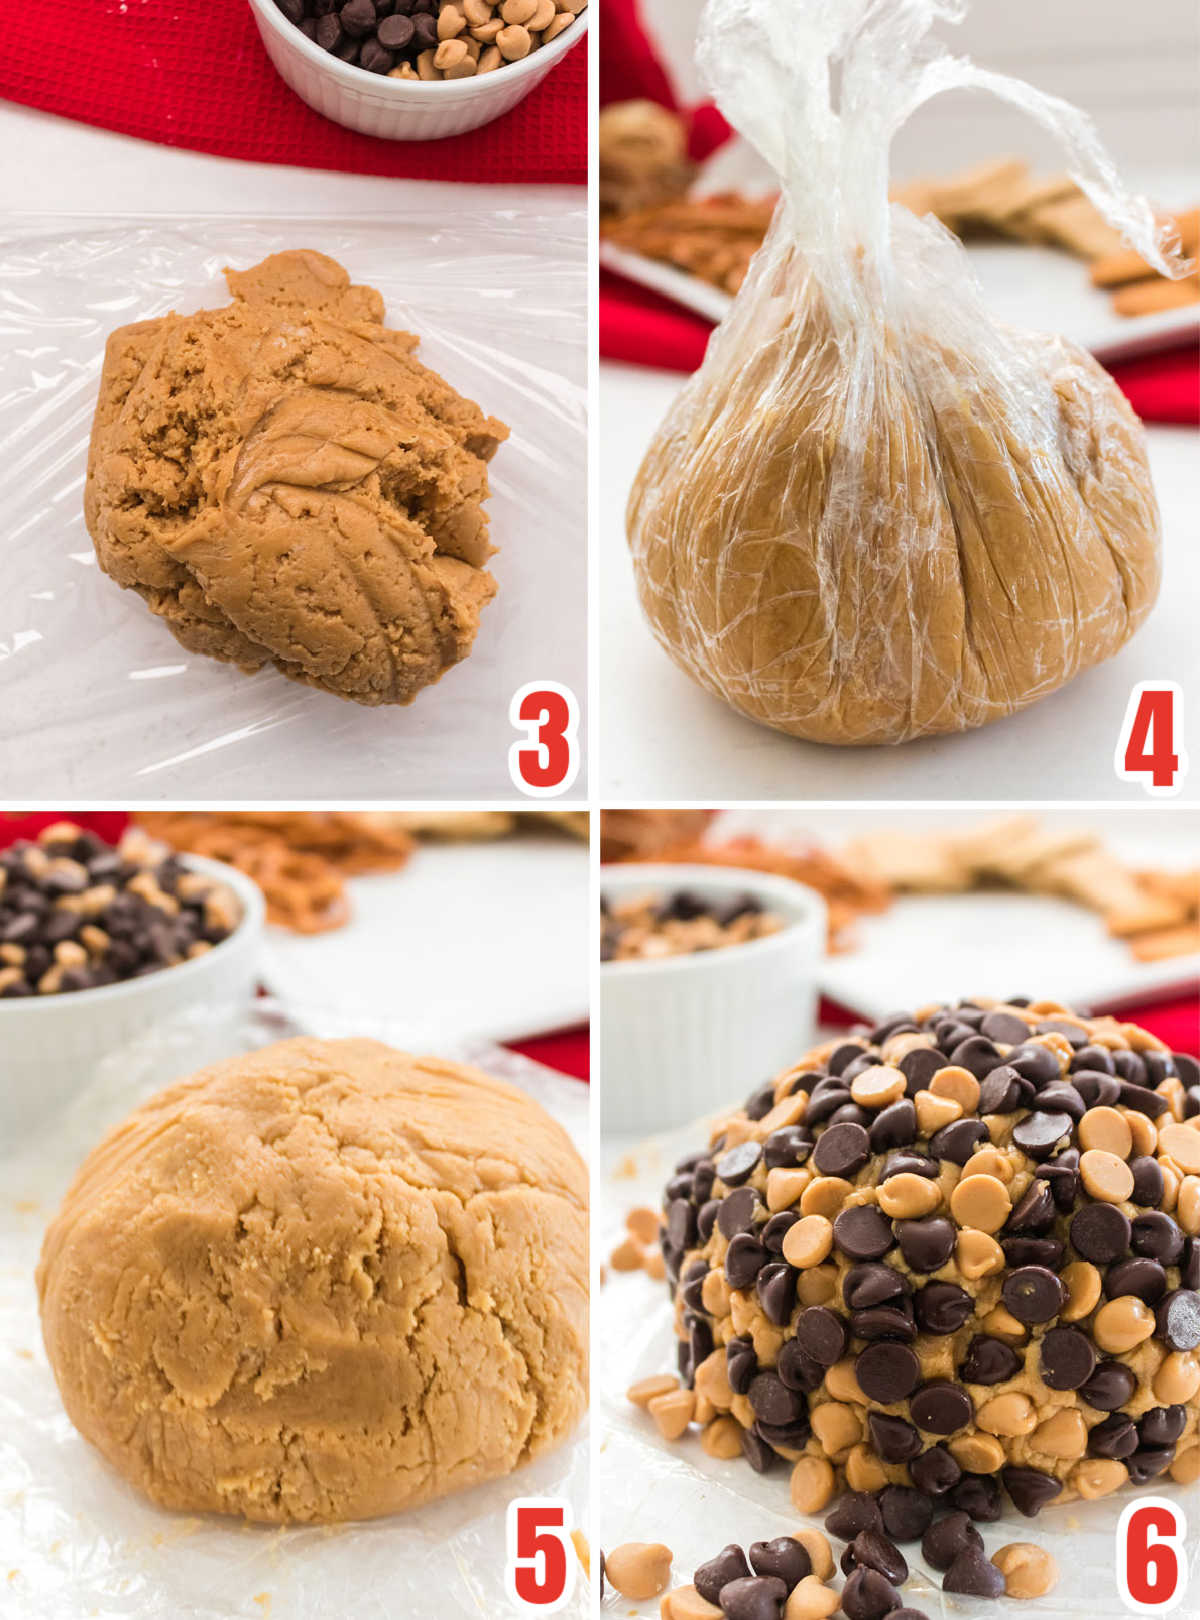 Collage image showing the steps from turning the peanut butter mixture into a cheese ball covered in chocolate chips.